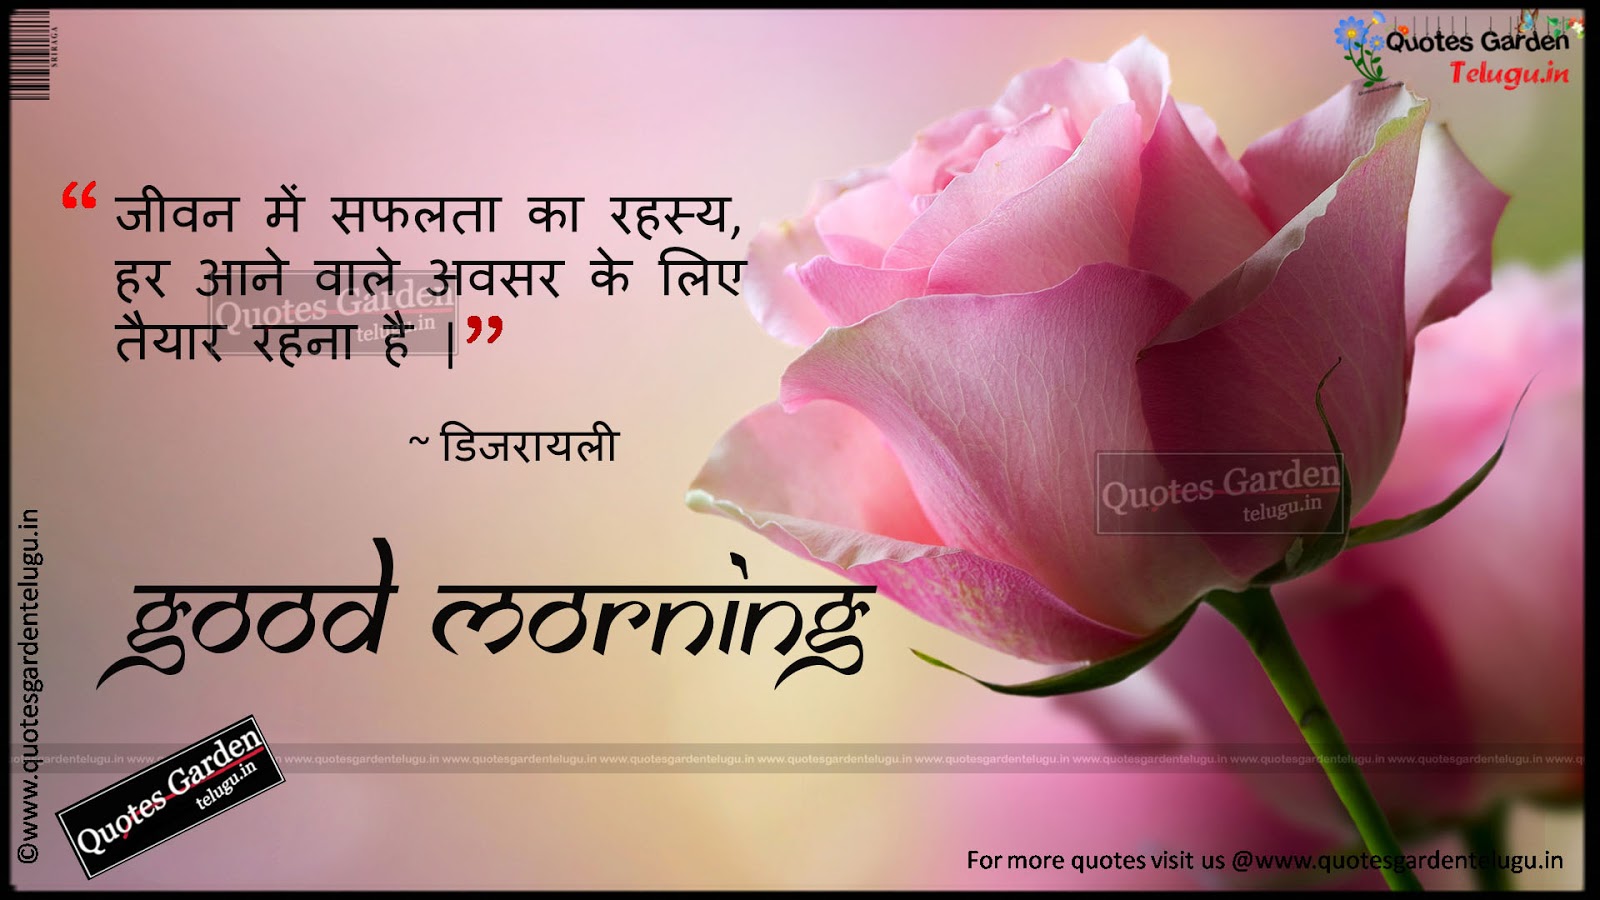 Good Morning Wishes With Motivational Quotes In Hindi The